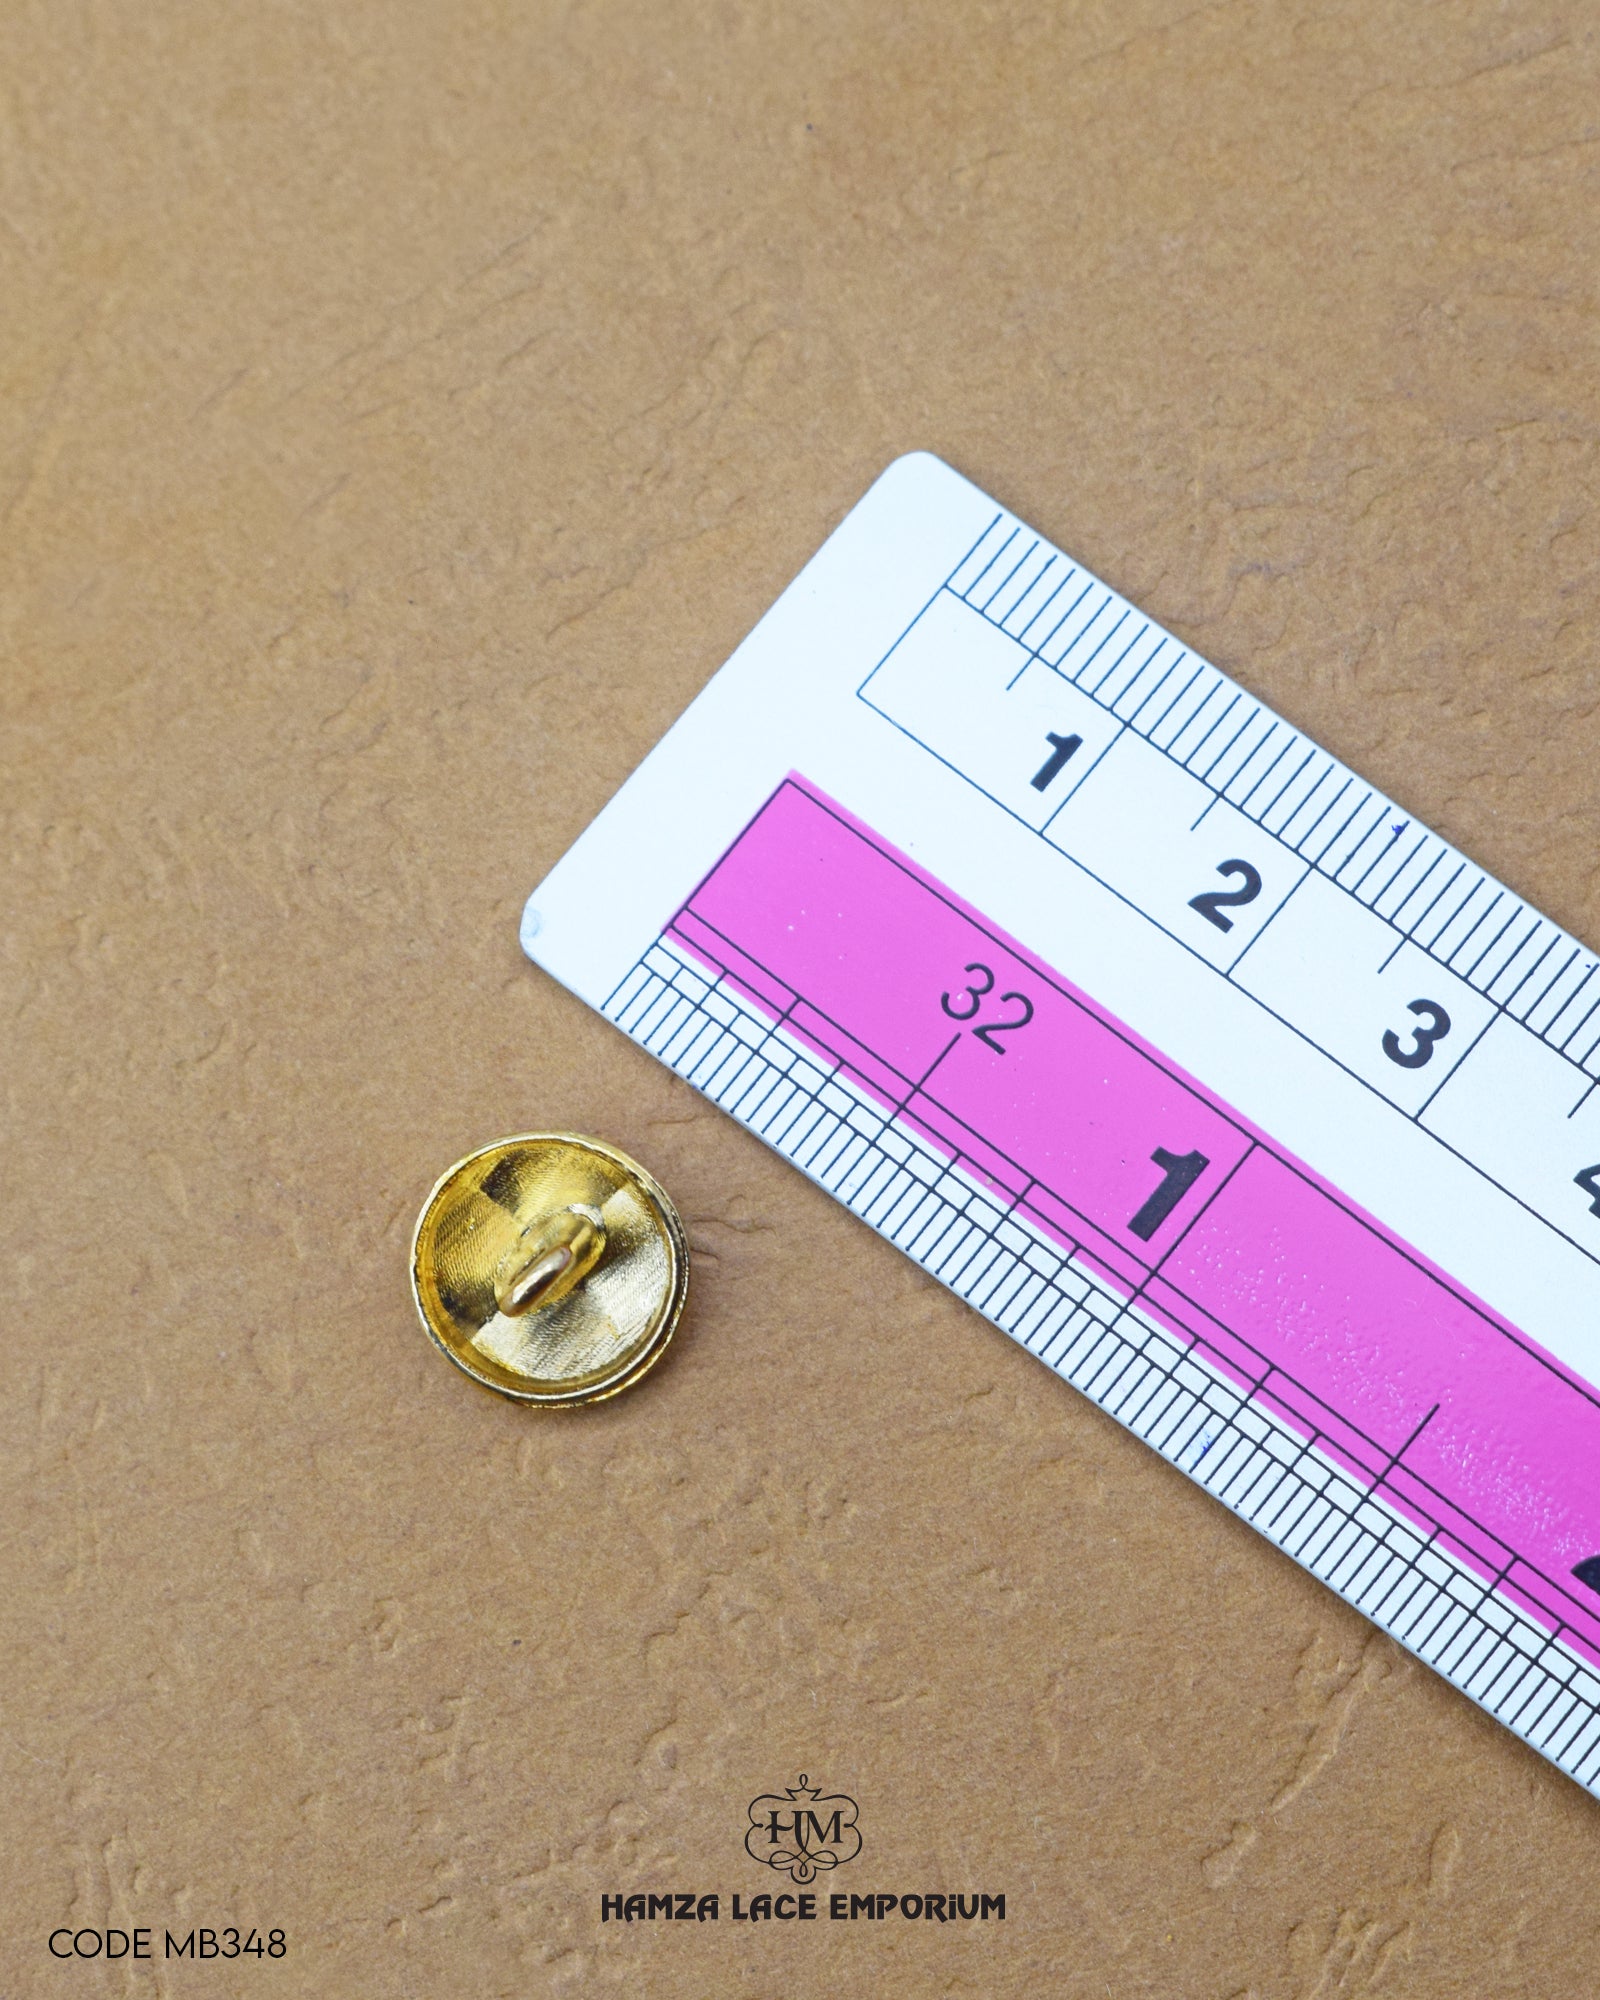 The dimensions of the 'Golden Metal Button MB348' are determined using a ruler.